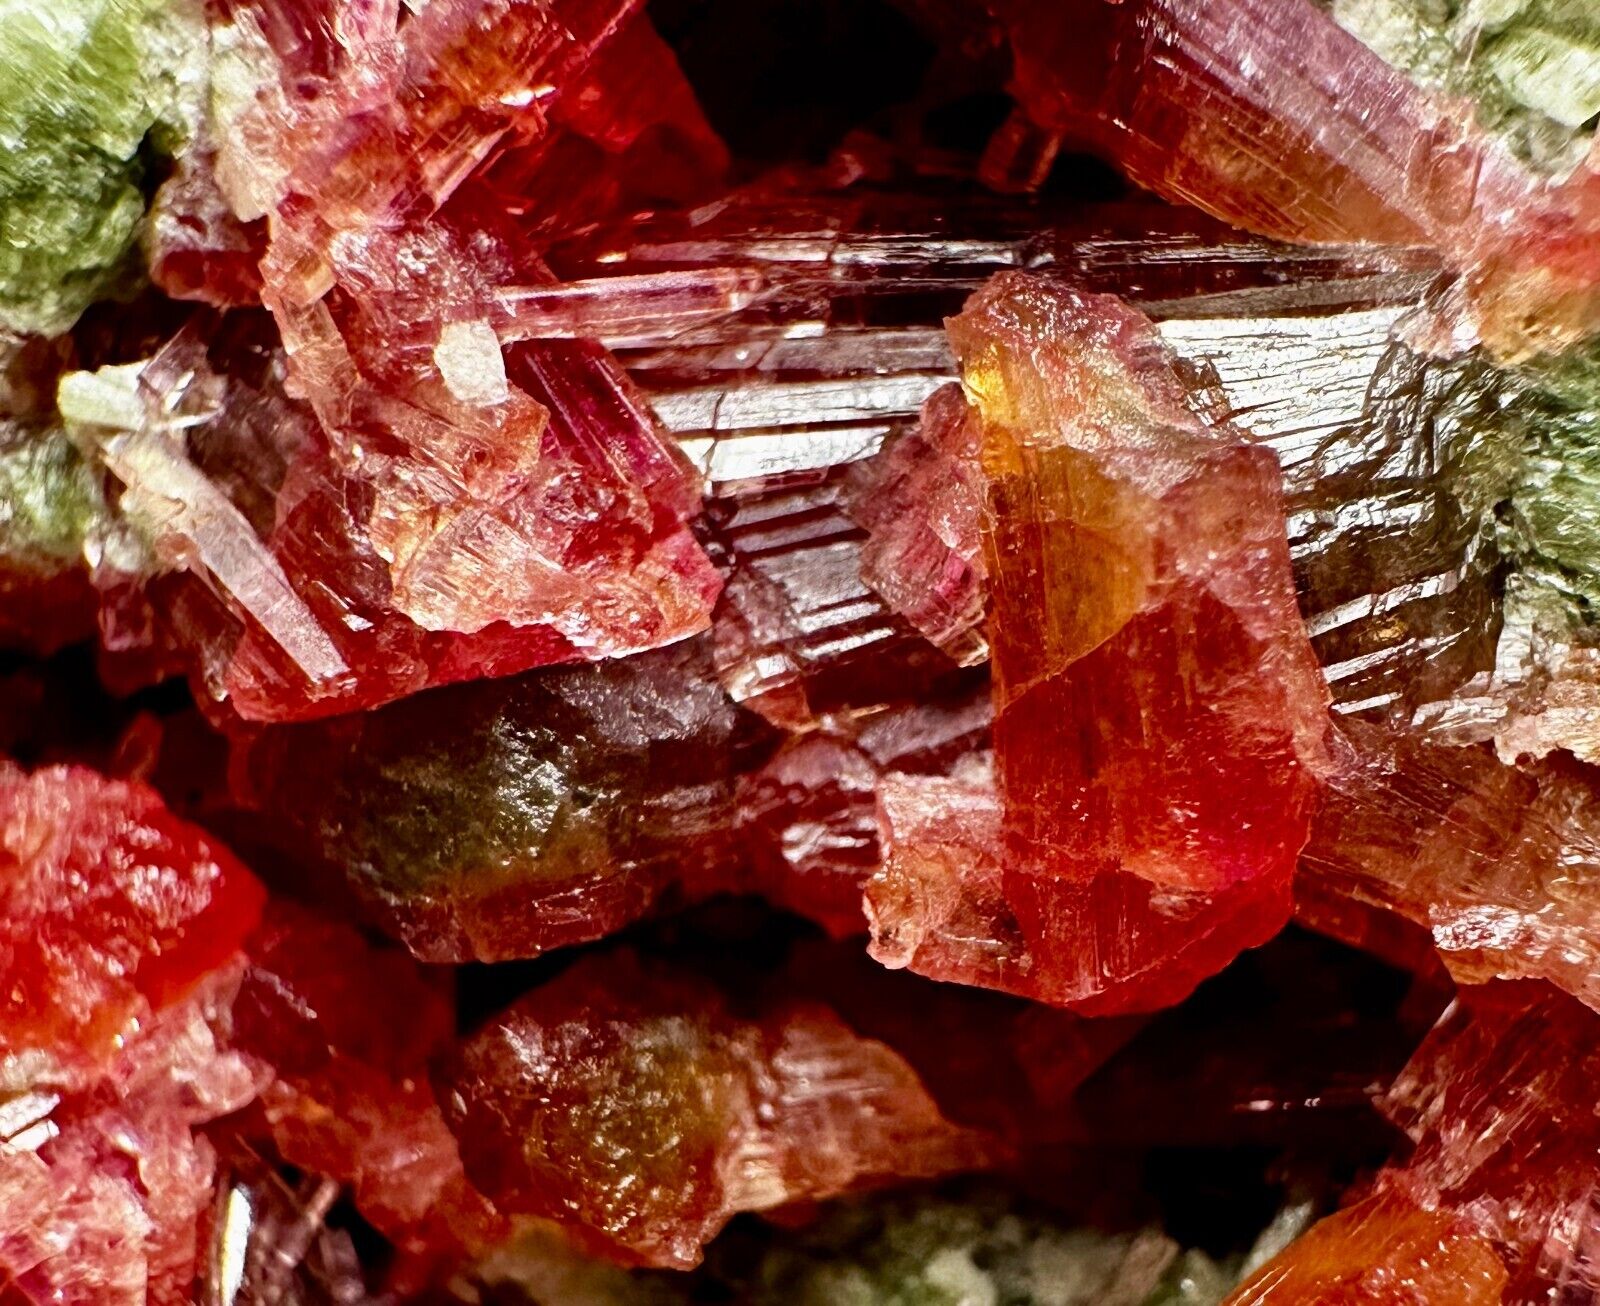 107 Gm Ultra Rare Top Red Clinozoisite Crystals Cluster On Epidote Specimen @AFG